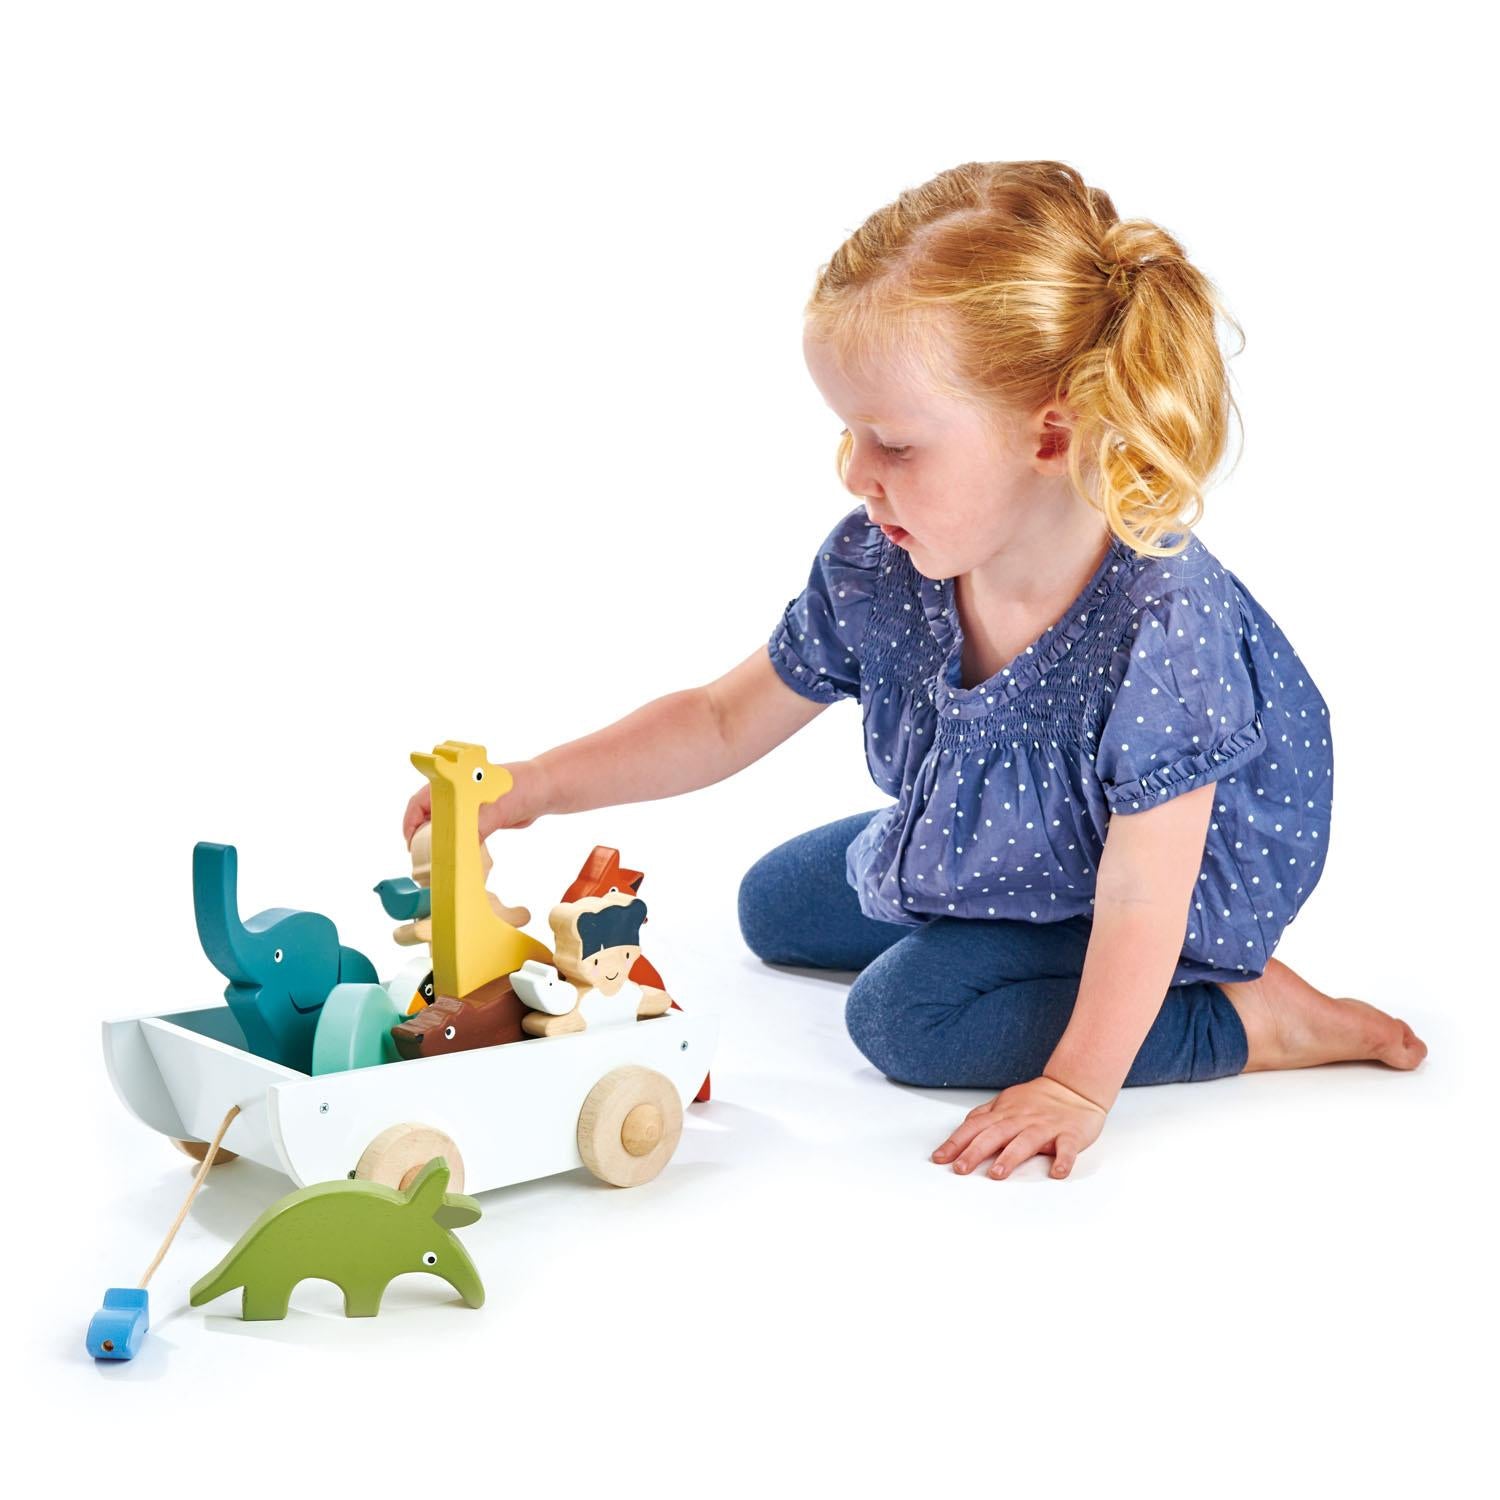 Tender Leaf Toys The Friend Pull Along Ship with Animals